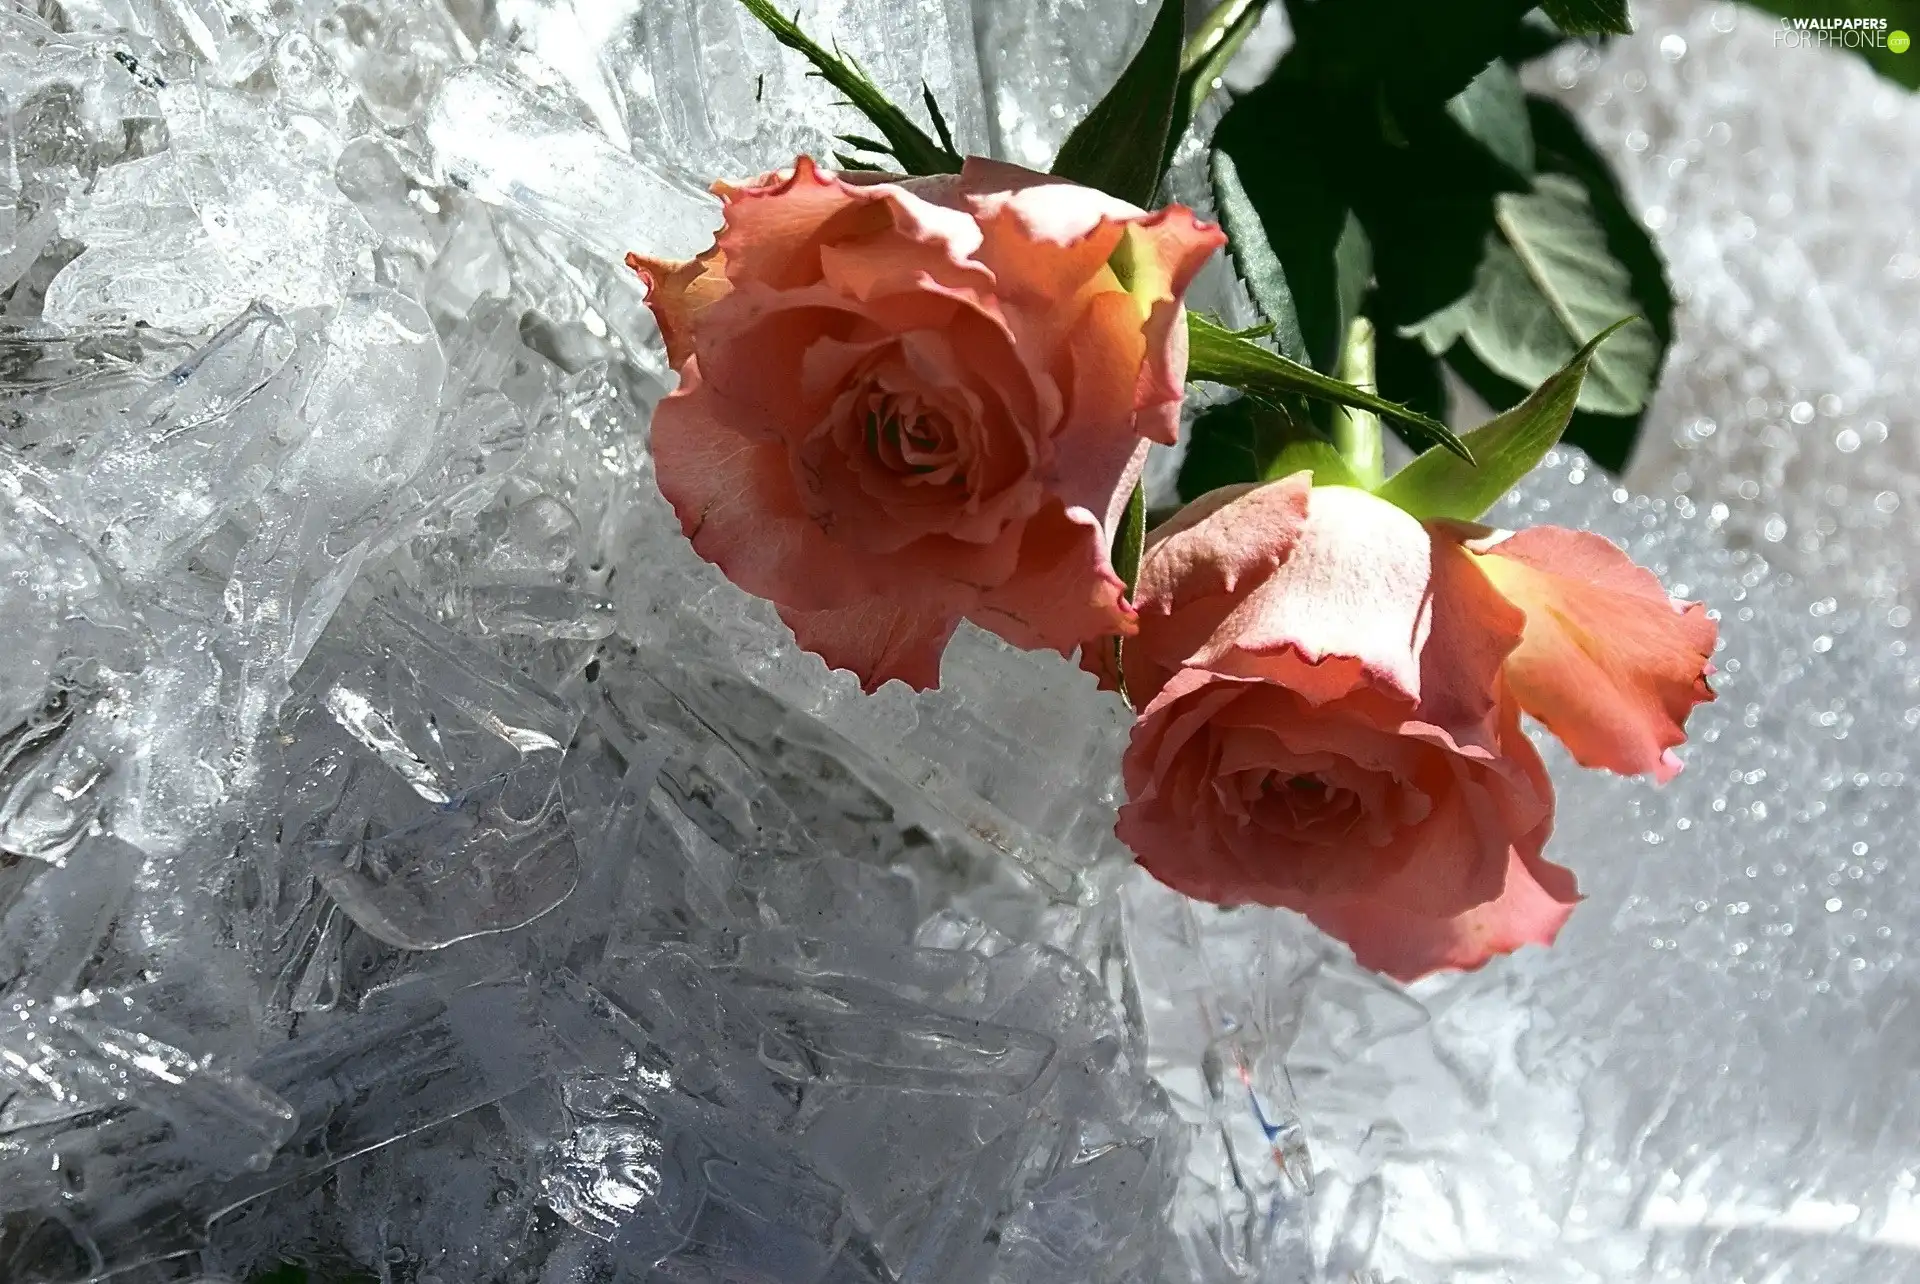 salmon, knuckle, ice, roses